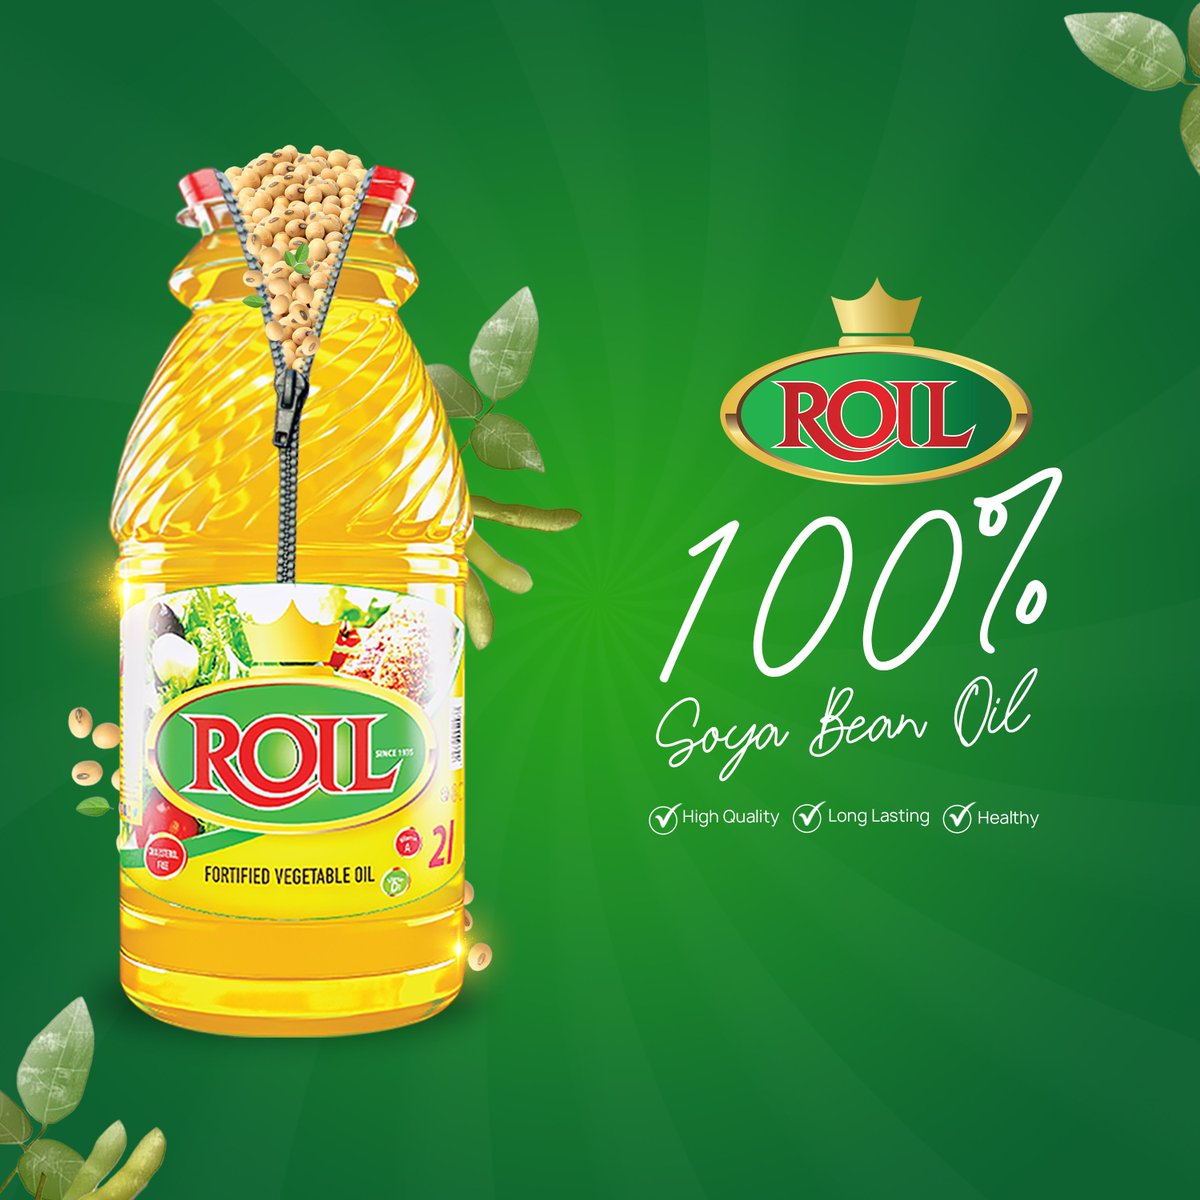 Roil Cooking Oil is made from the finest soya beans for high quality, long lasting and healthy cooking oil. @BusisaMoyo #roilcookingoil #unitedrefinerieslimited